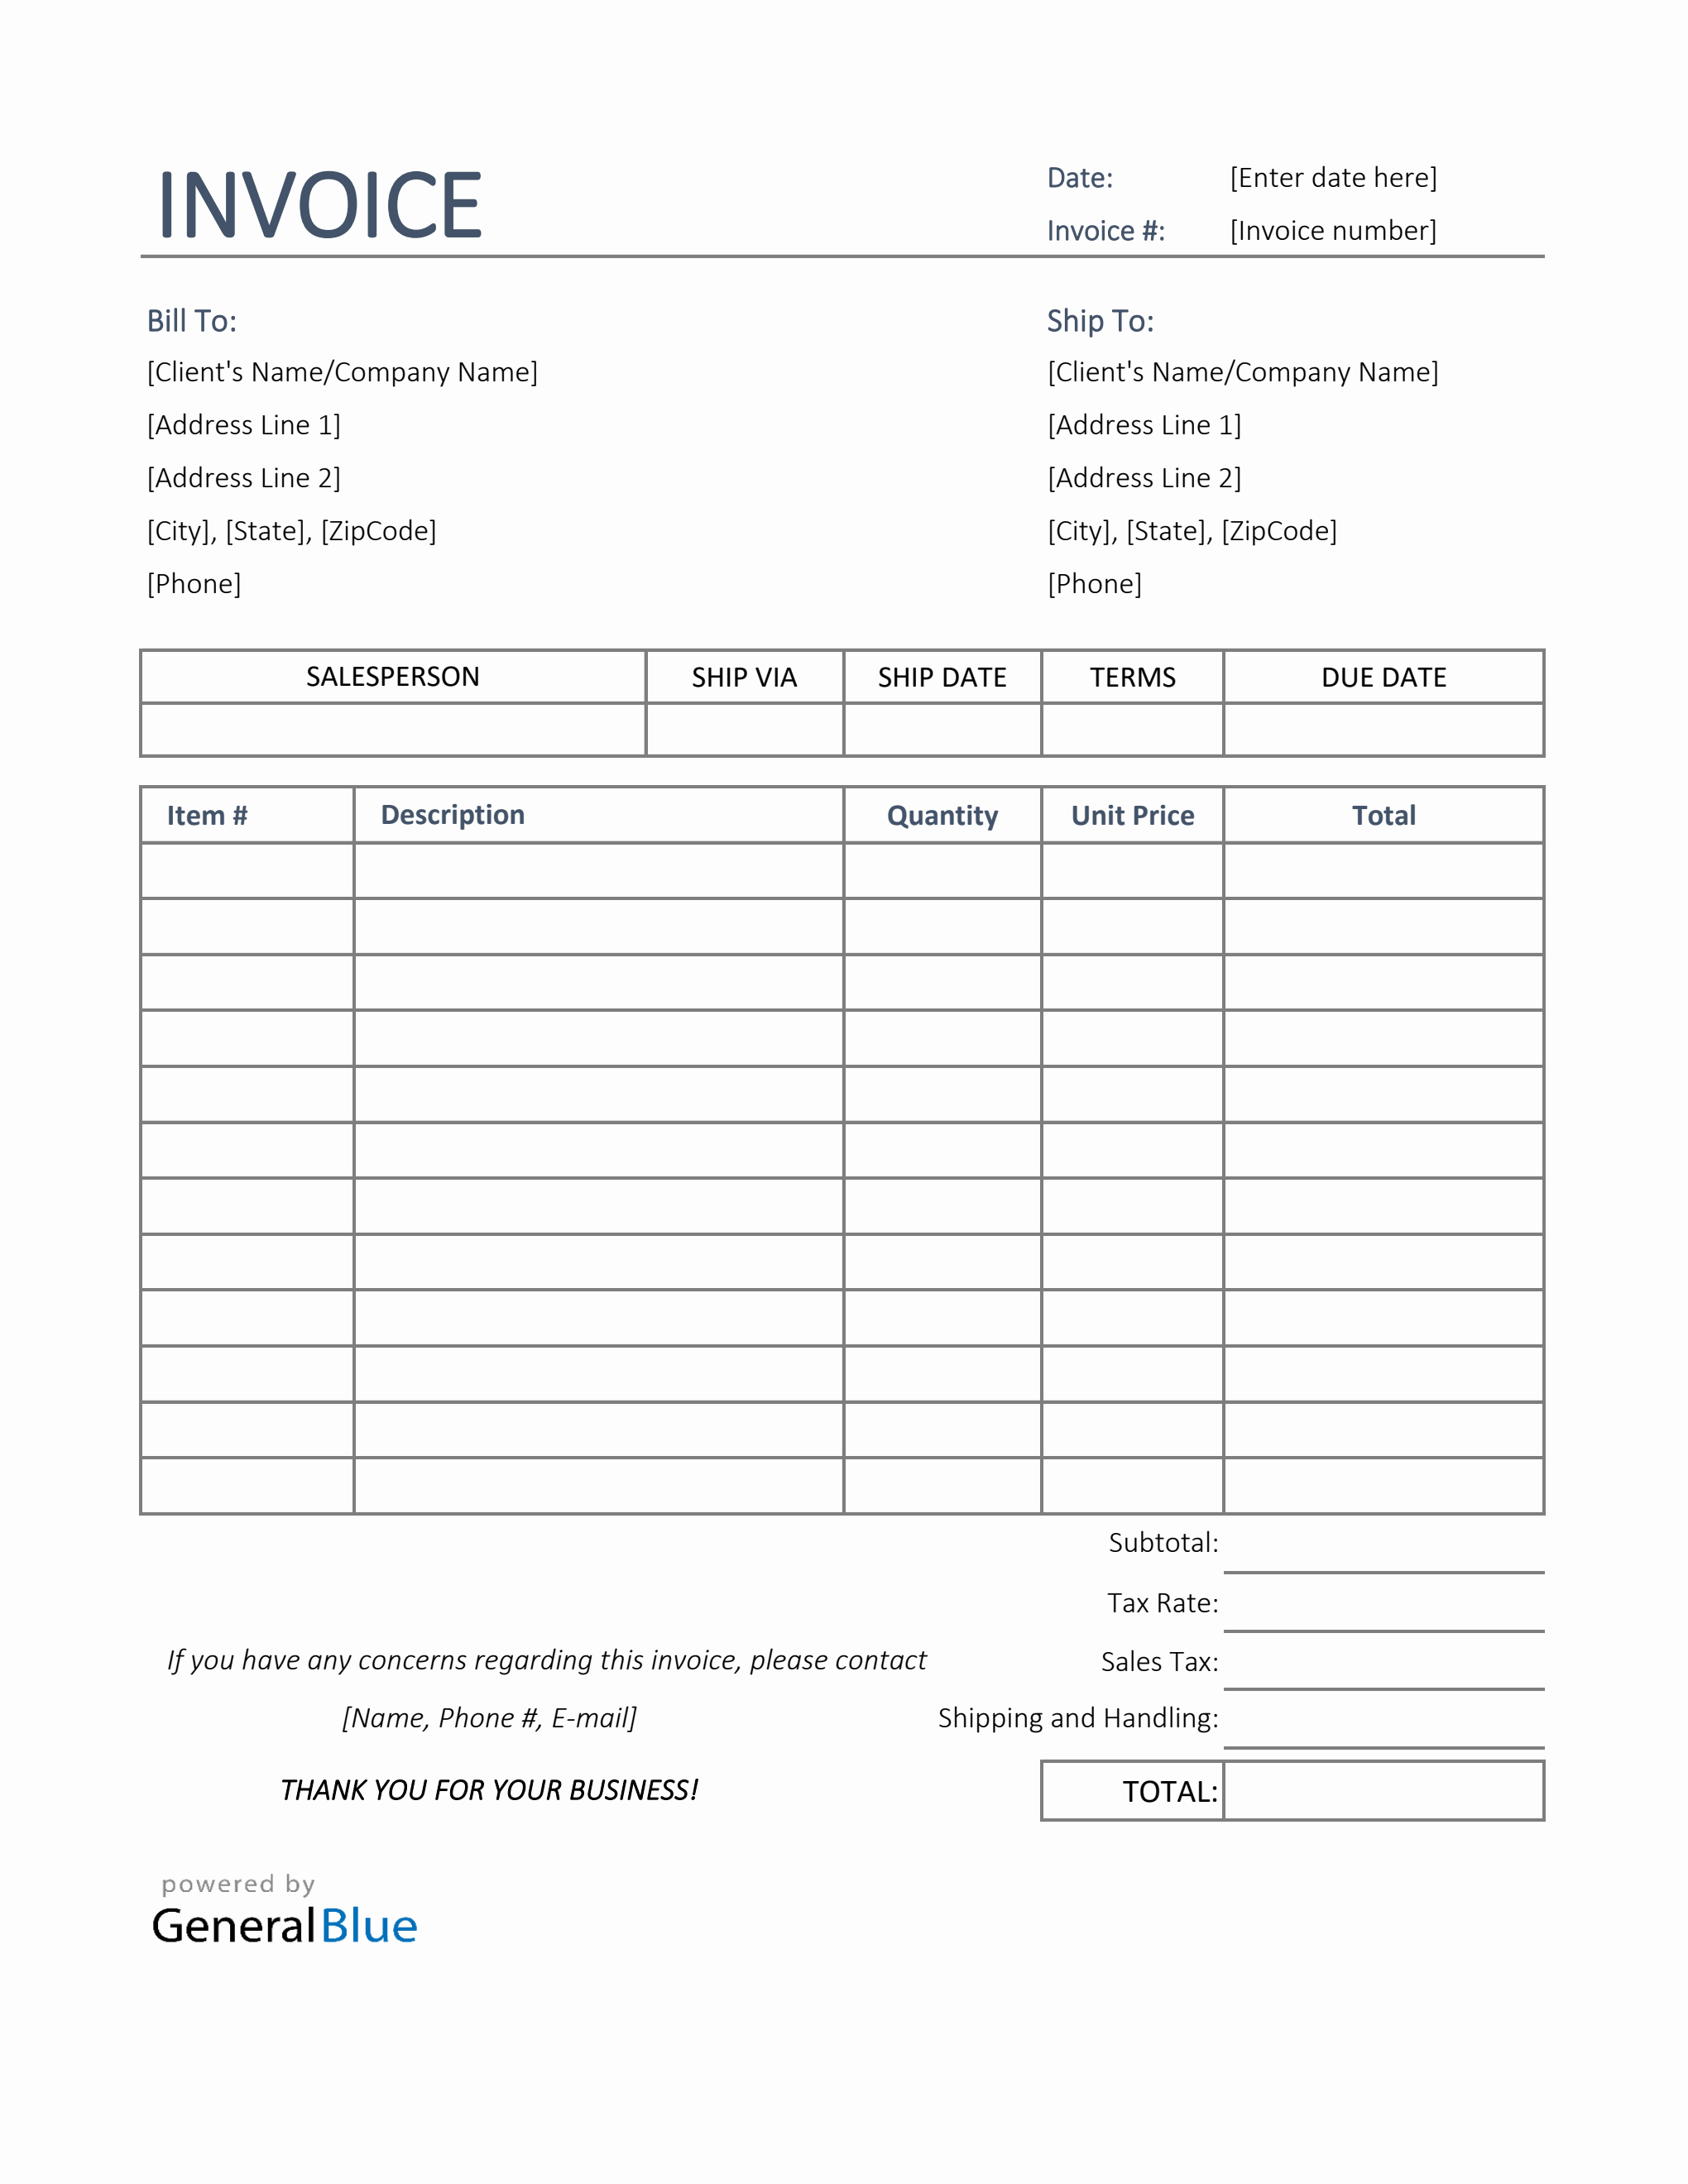 Sales Invoice Template in Excel (Simple)